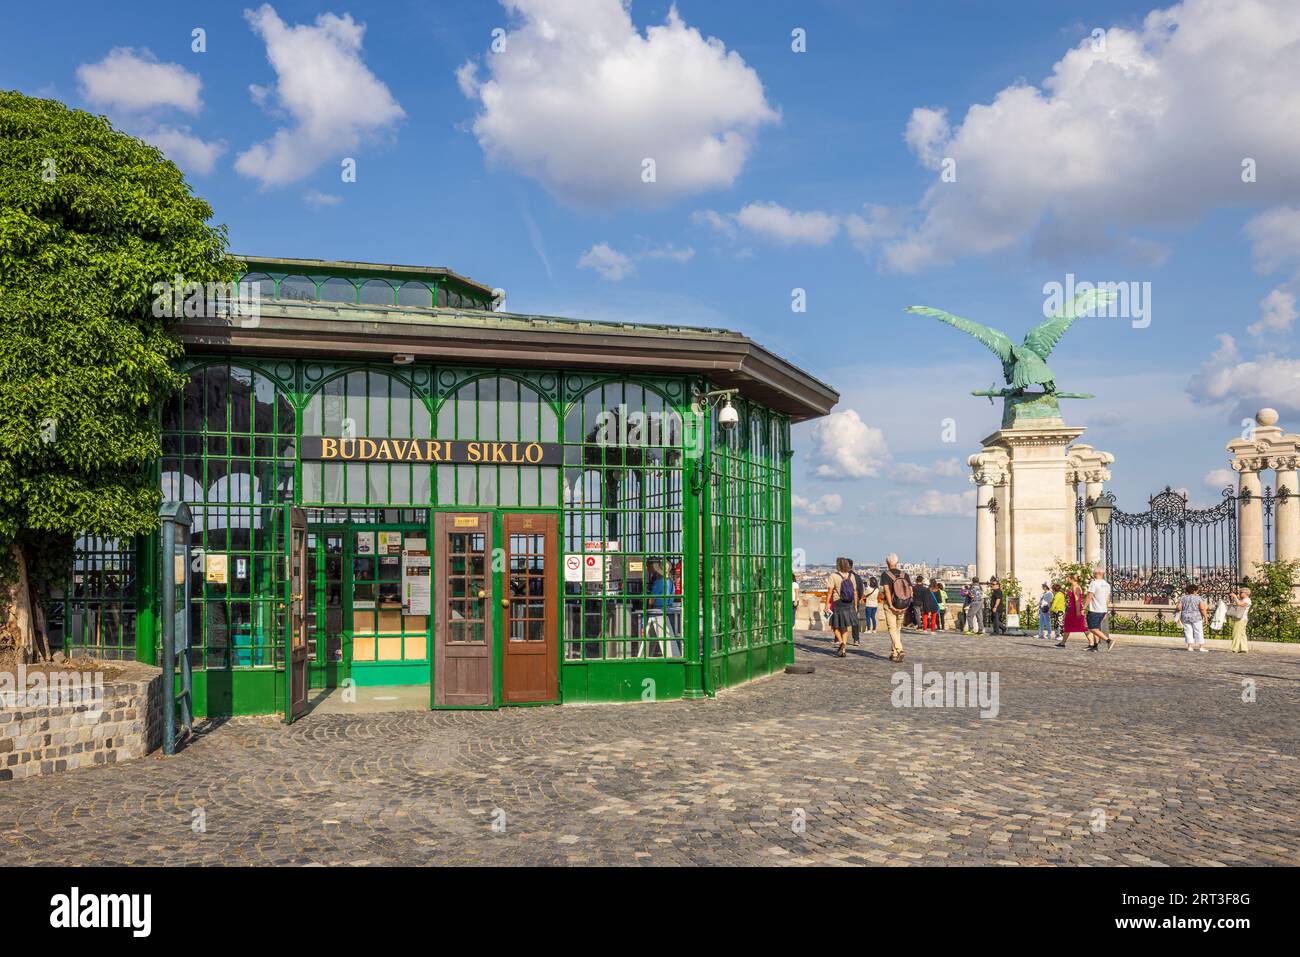 The entrance to the Funicular Railway at Buda Castle, Budapest, Hungary Stock Photo